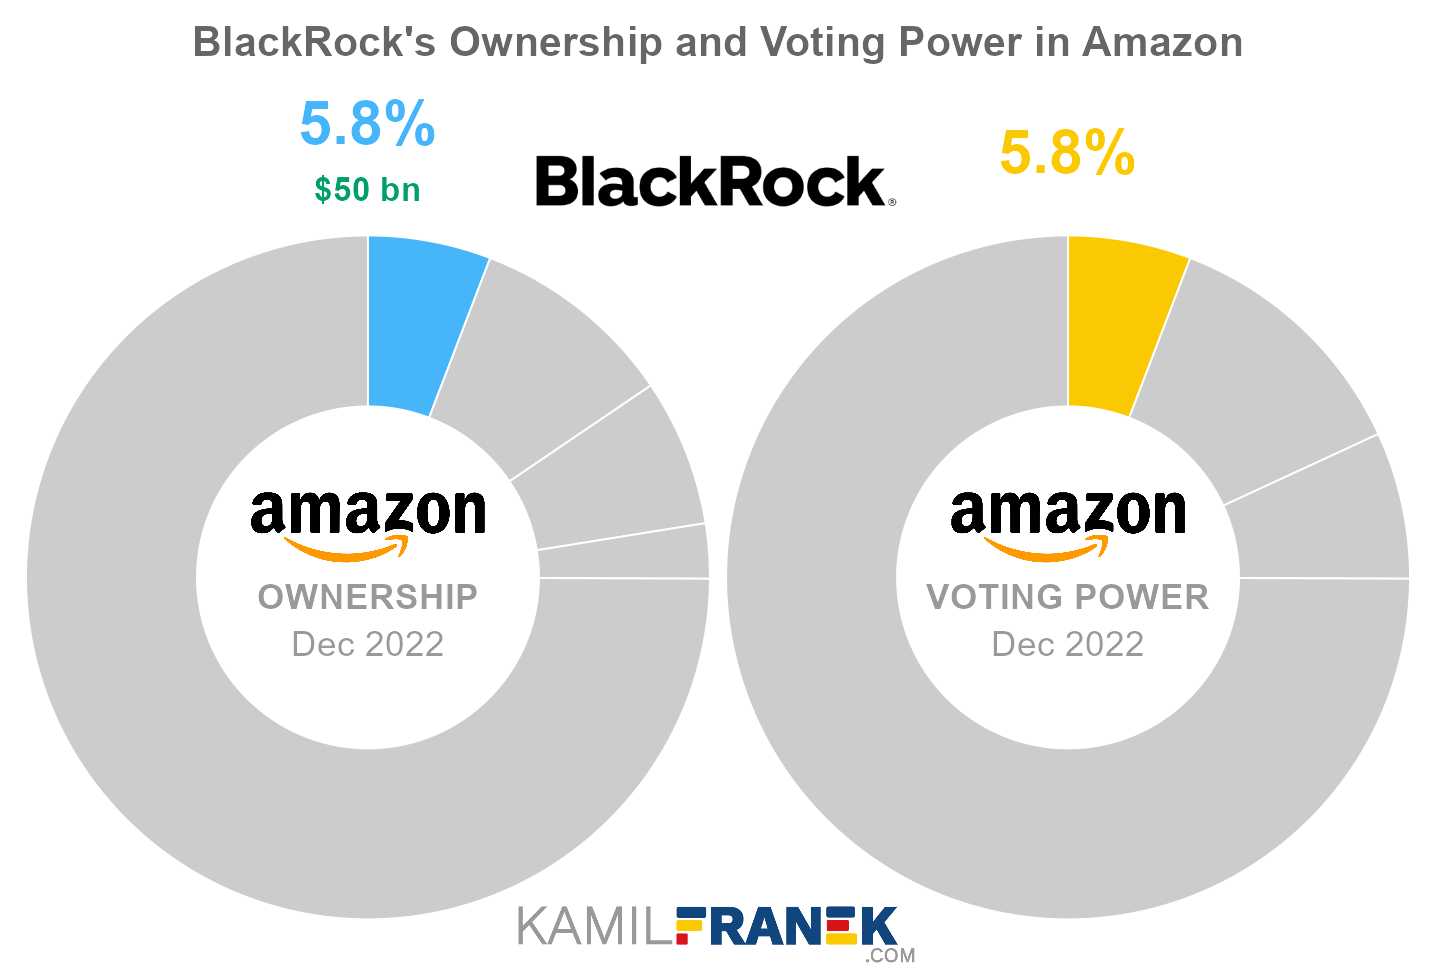 BlackRock's share ownership and voting power in Amazon (chart)